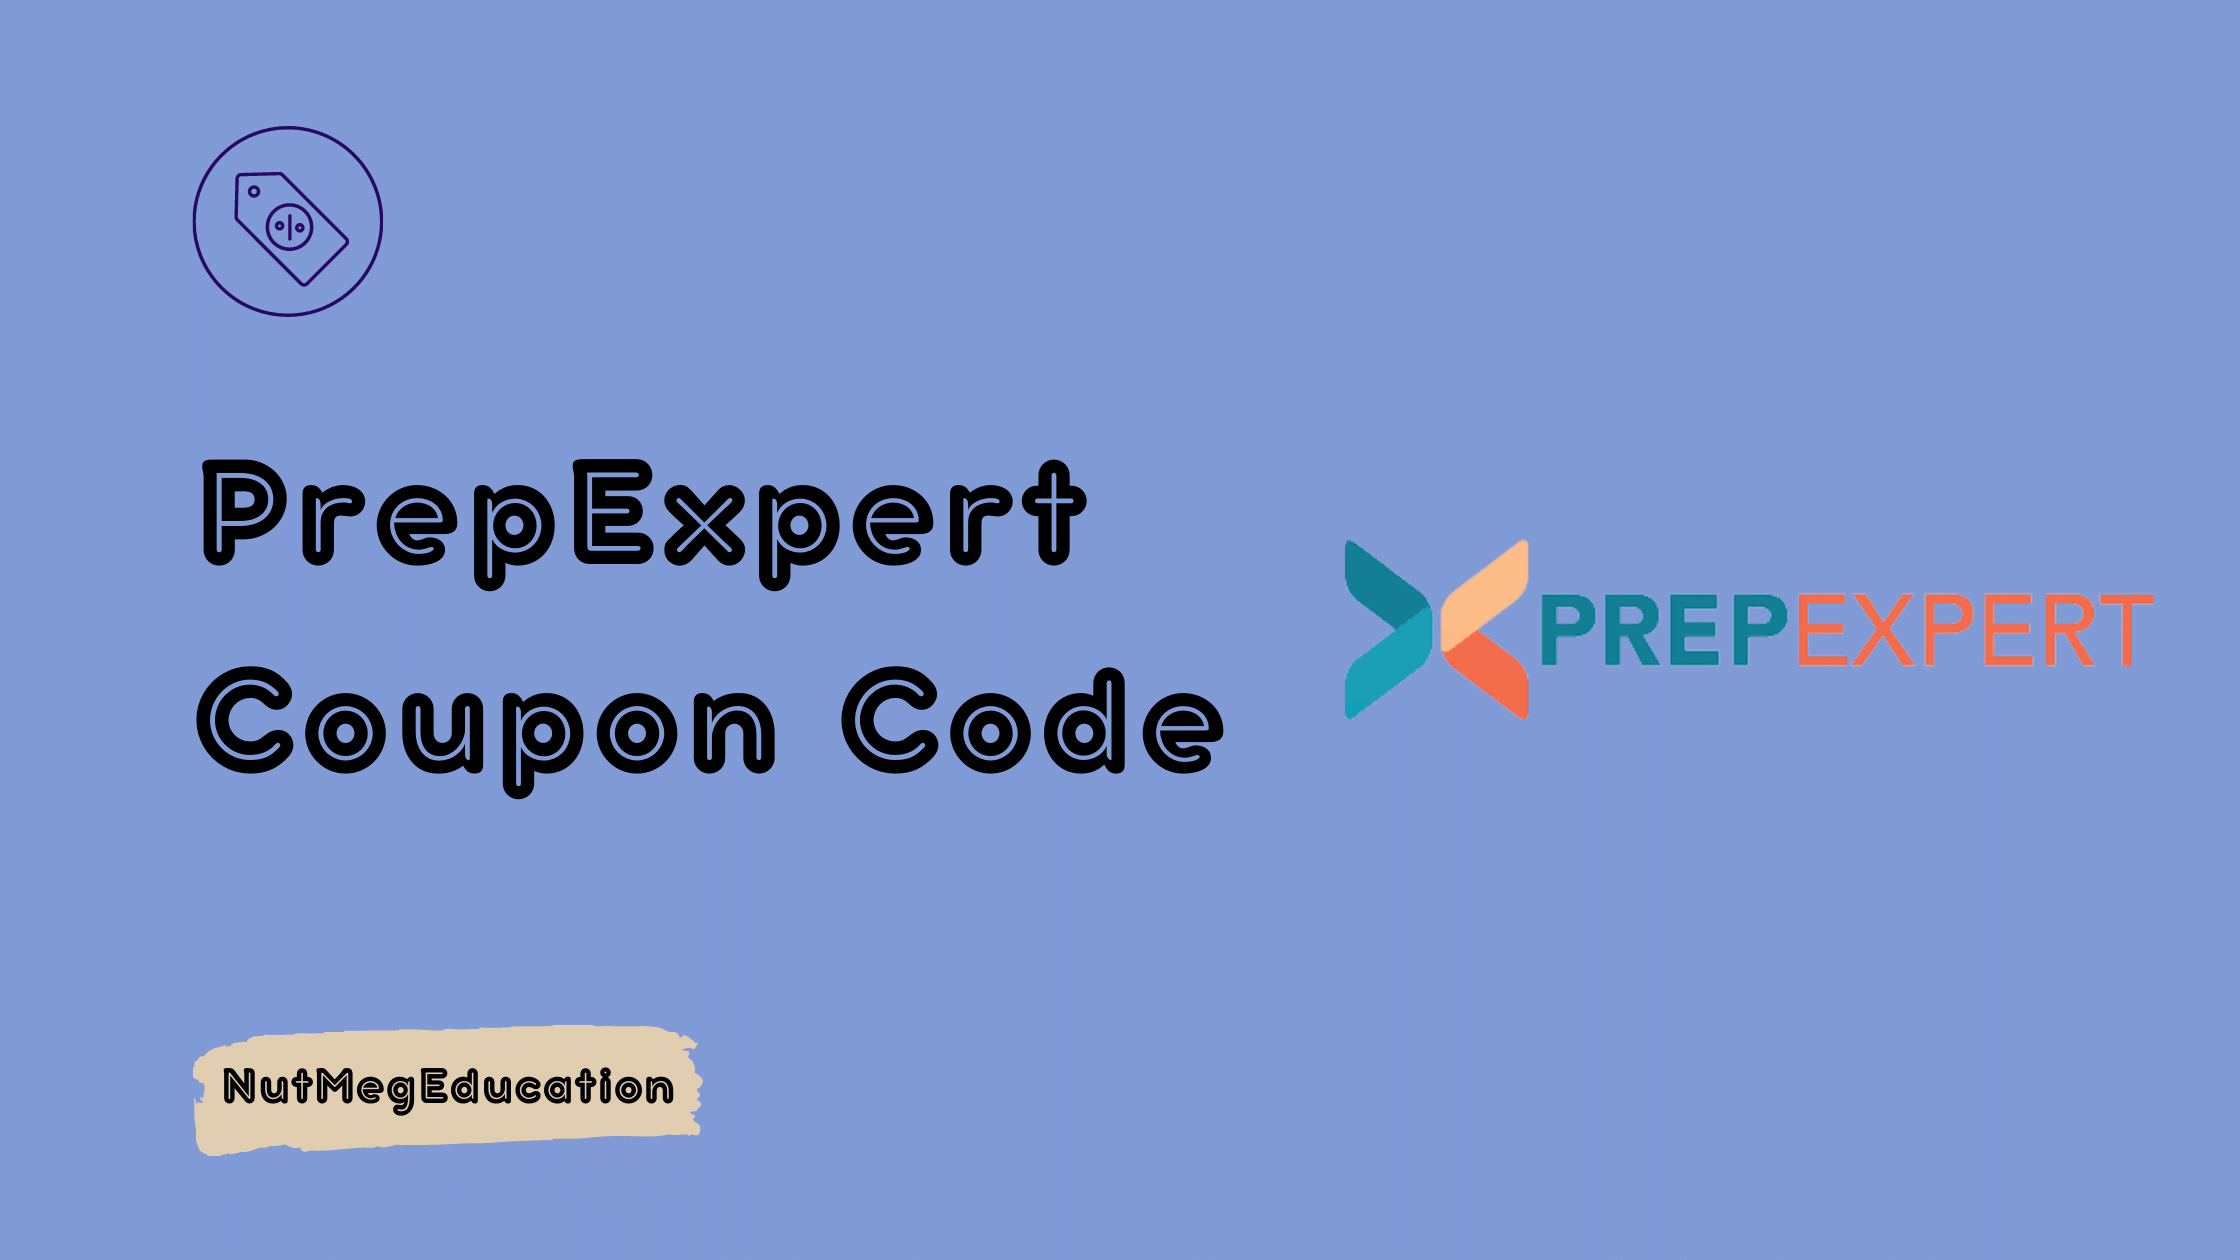 PrepExpert Coupon Code - NutMegEducation